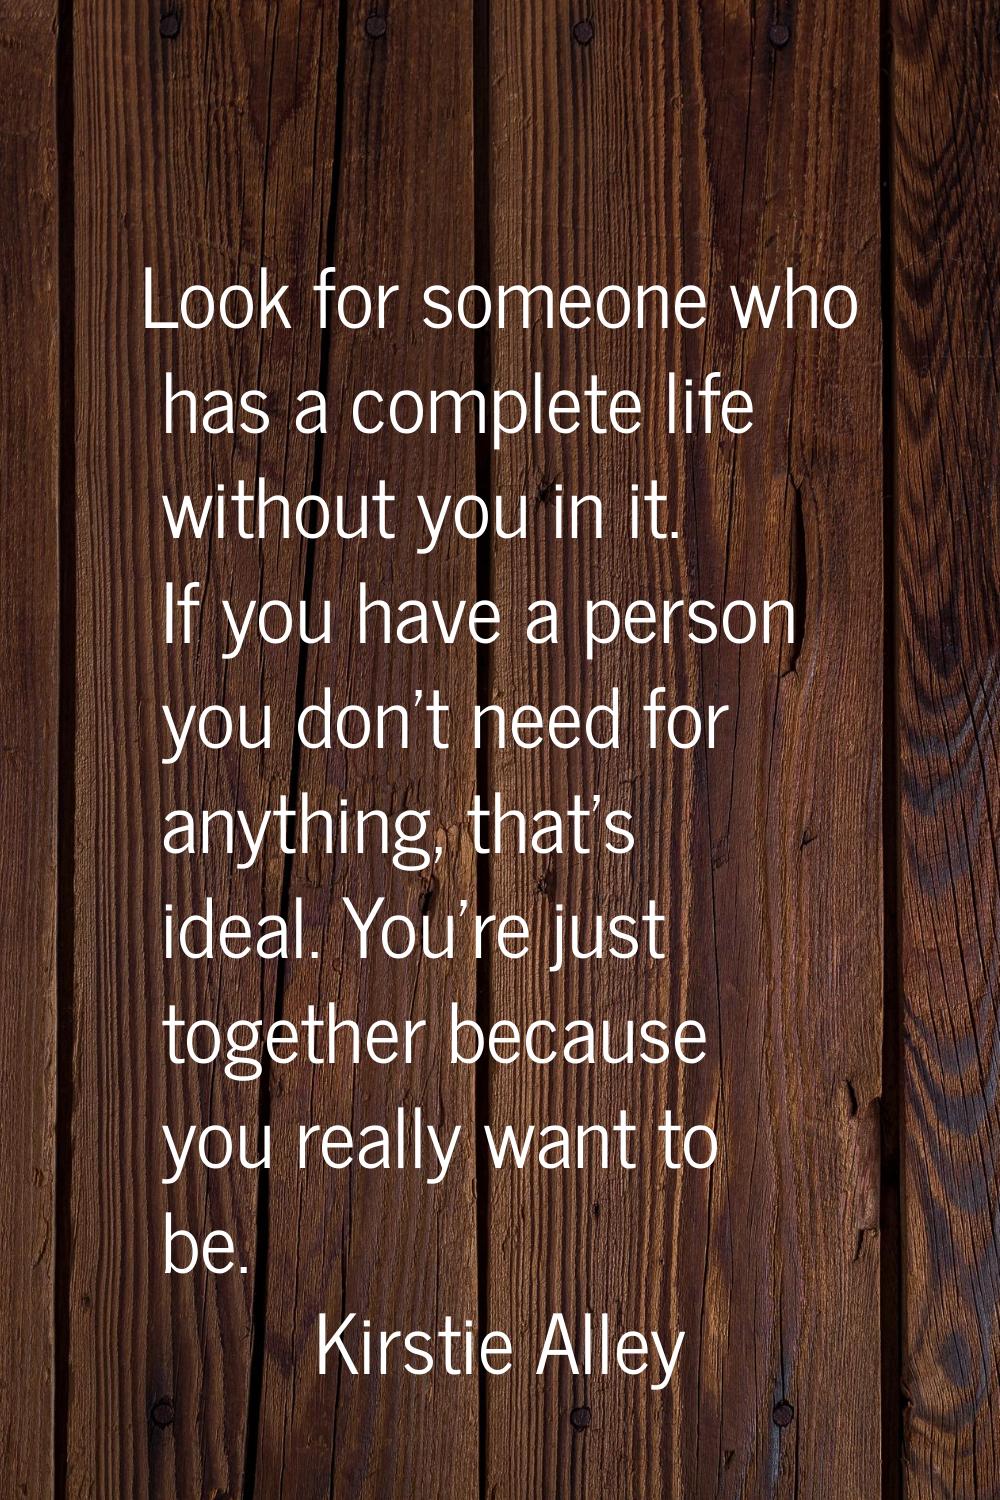 Look for someone who has a complete life without you in it. If you have a person you don't need for